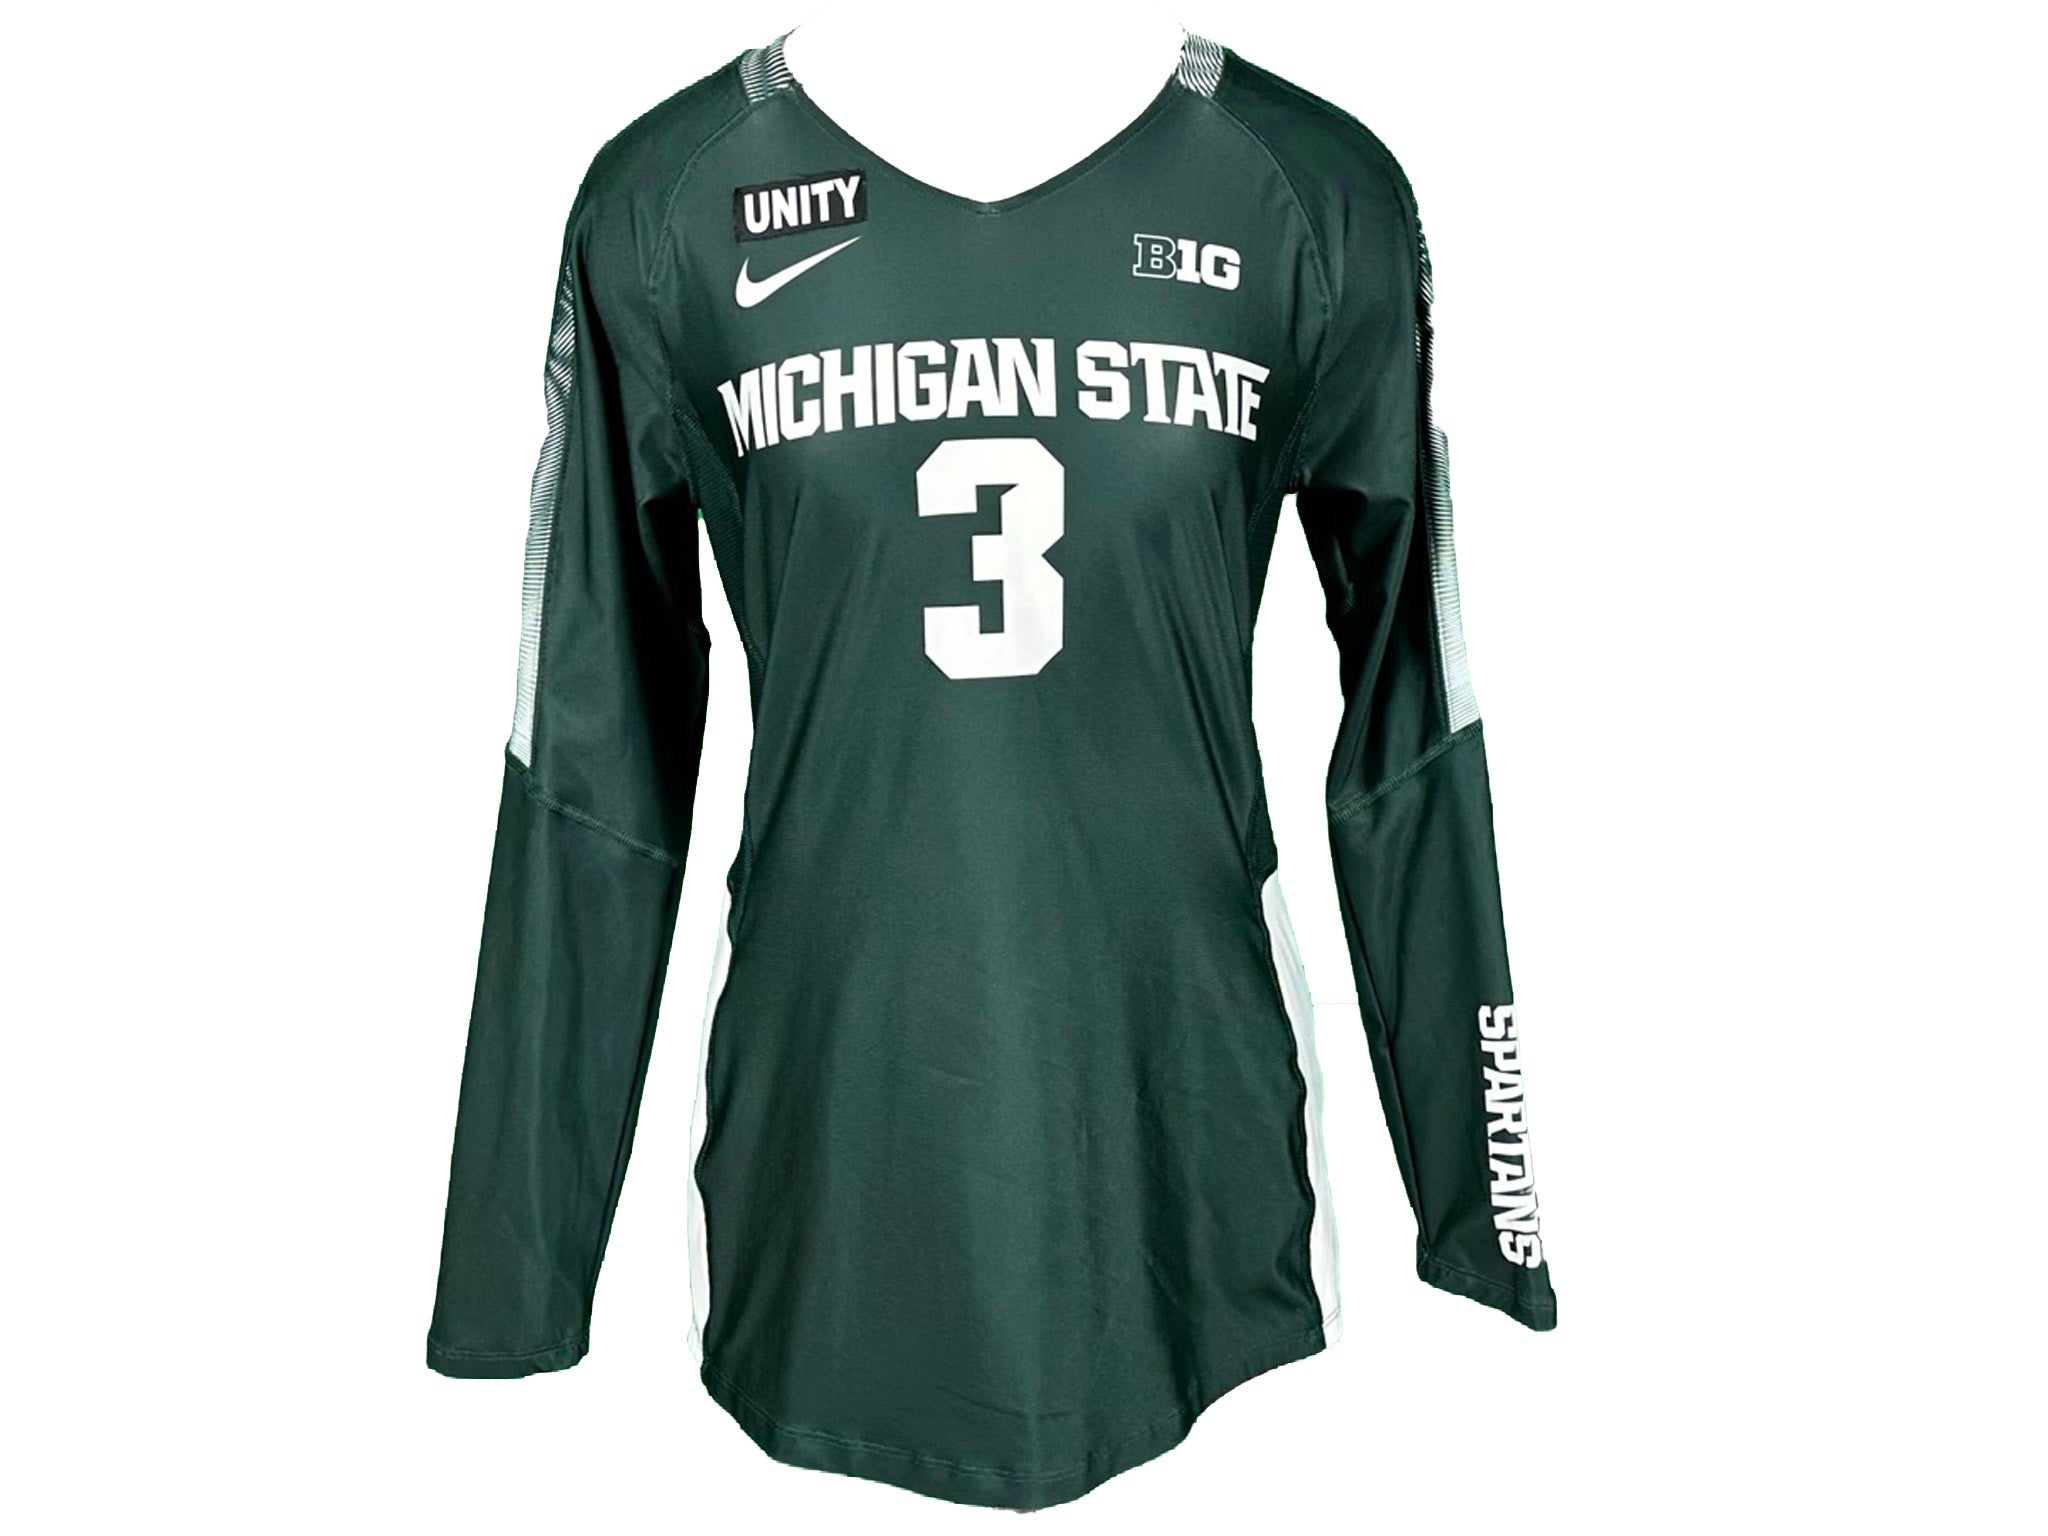 Spartans jersey collection